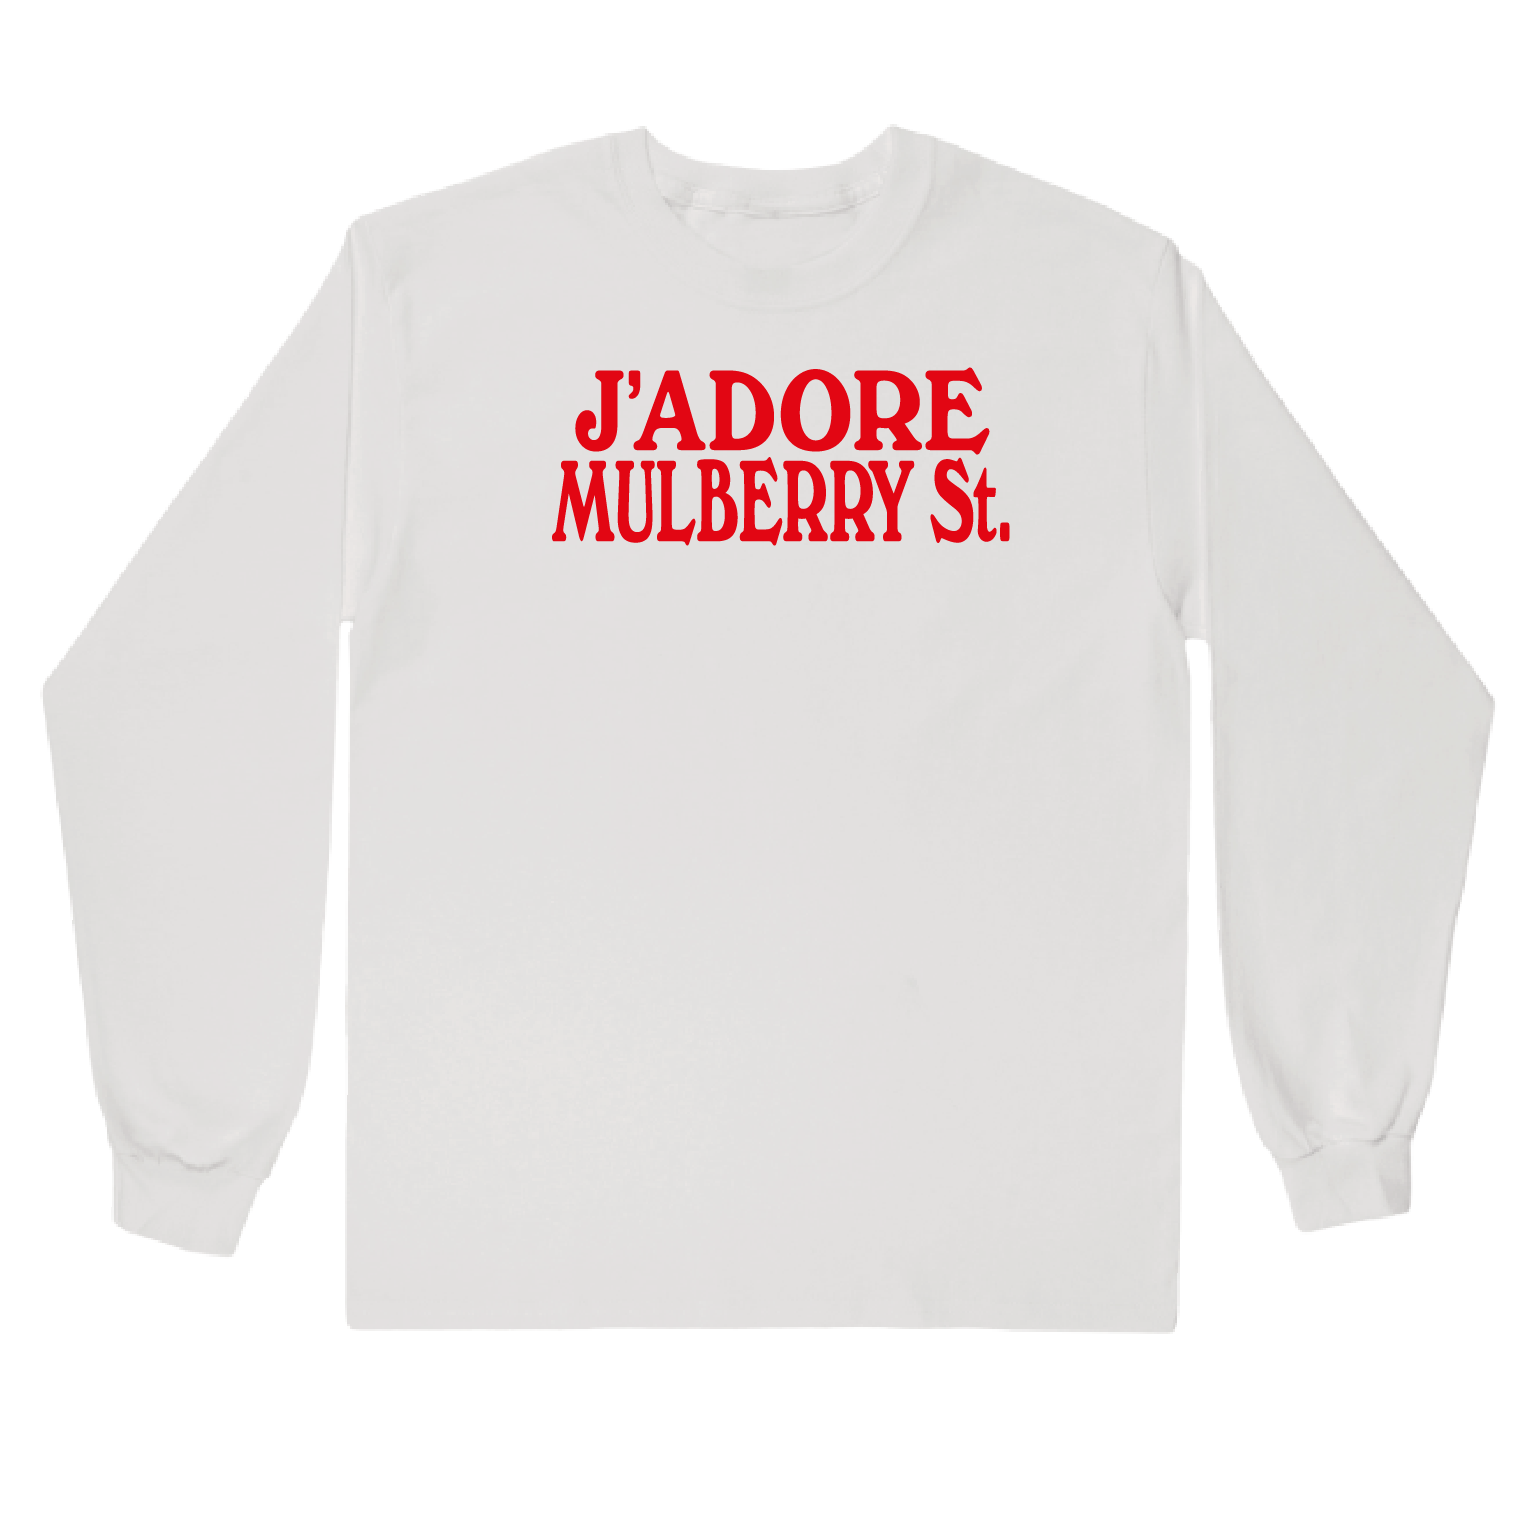 J'Adore Mulberry St. Long-sleeved tee White